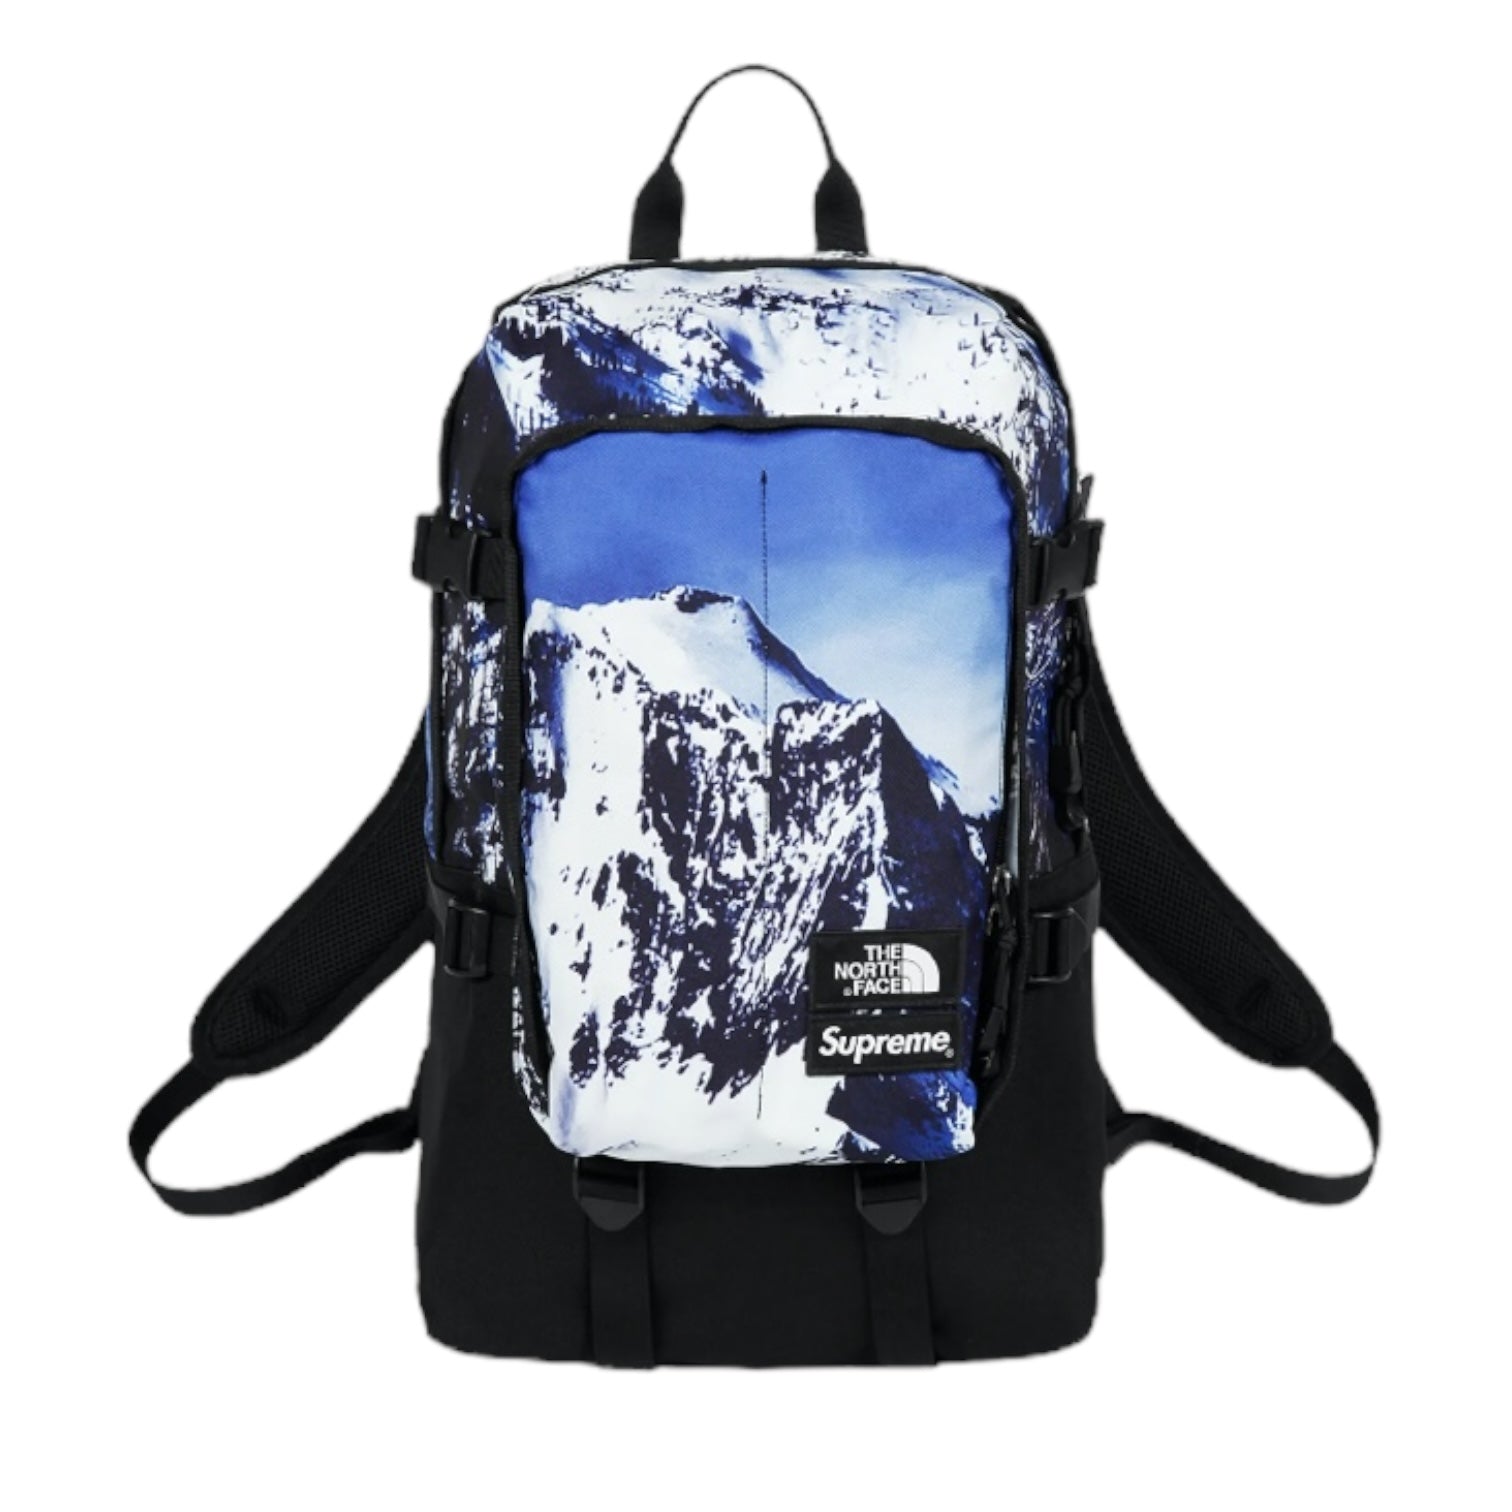 FW17 Supreme x The North Face Mountain Expedition Backpack